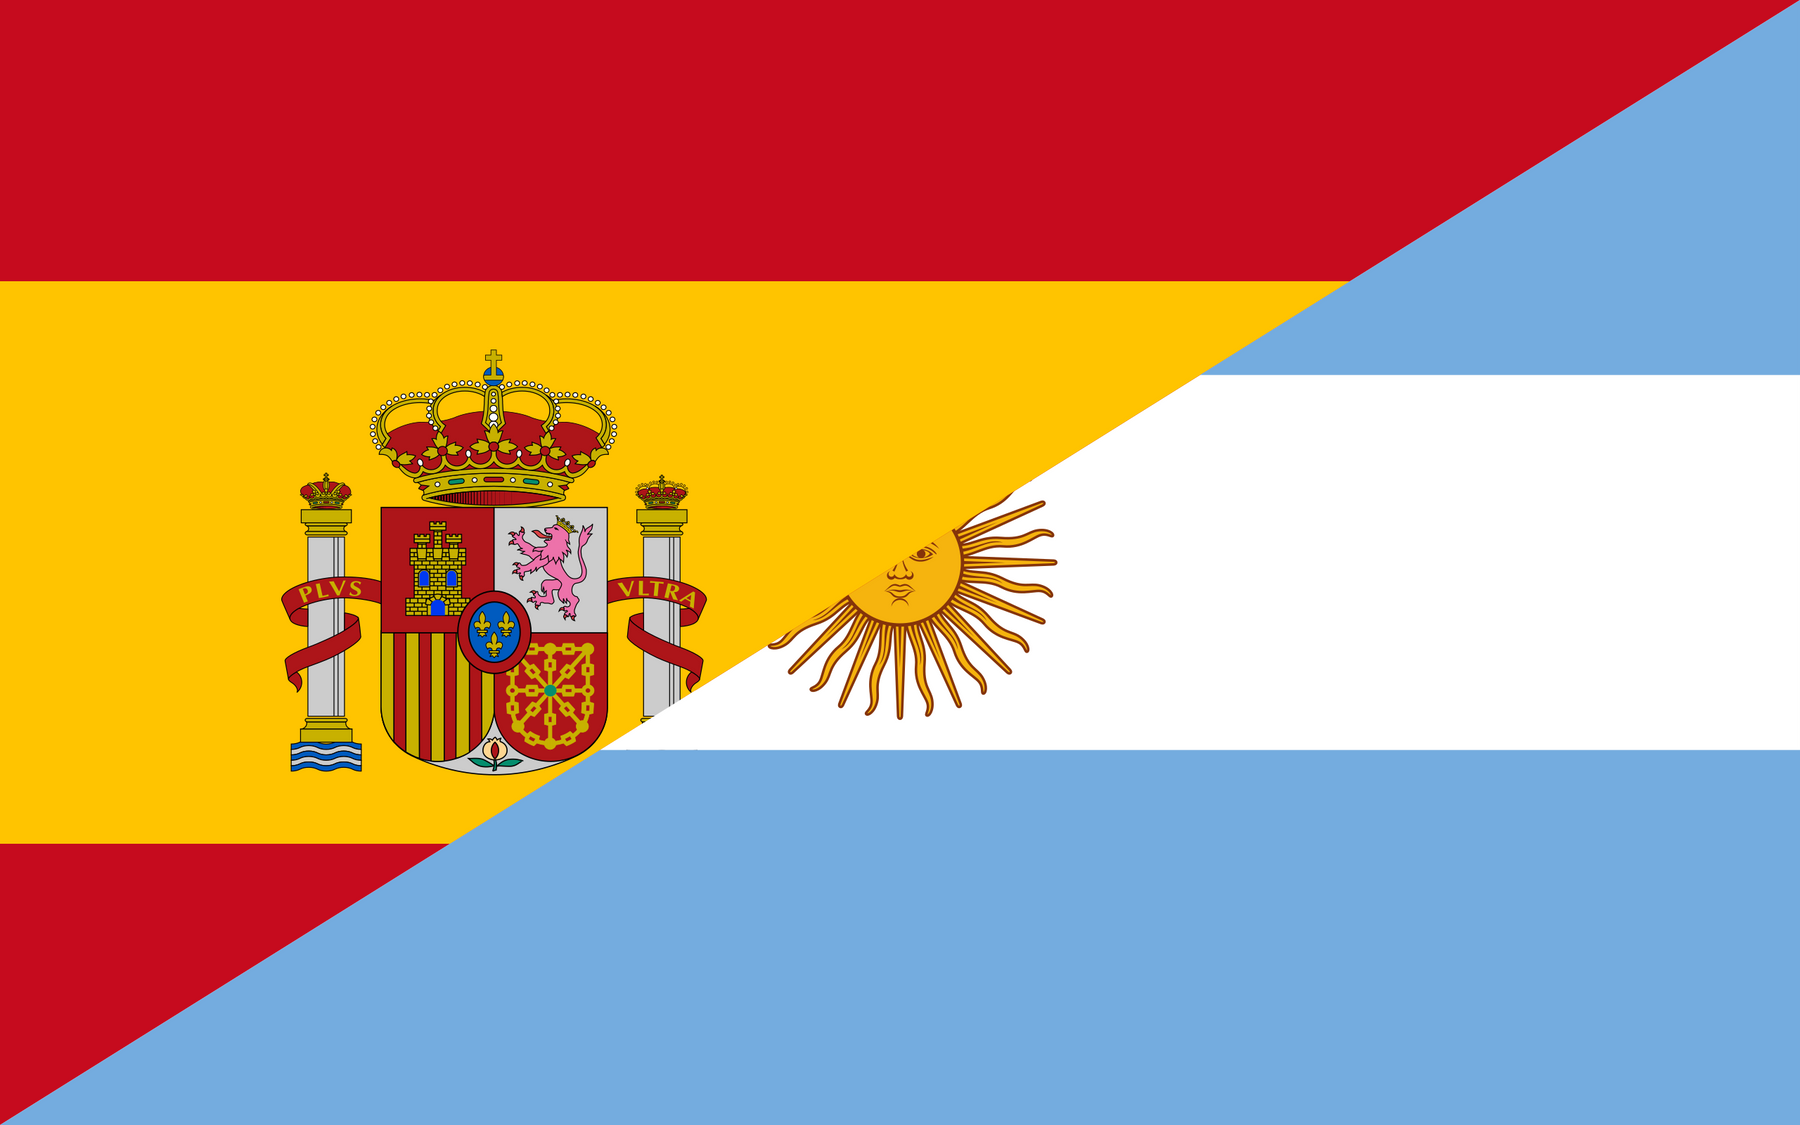 How to buy collectible items from Argentina to Spain